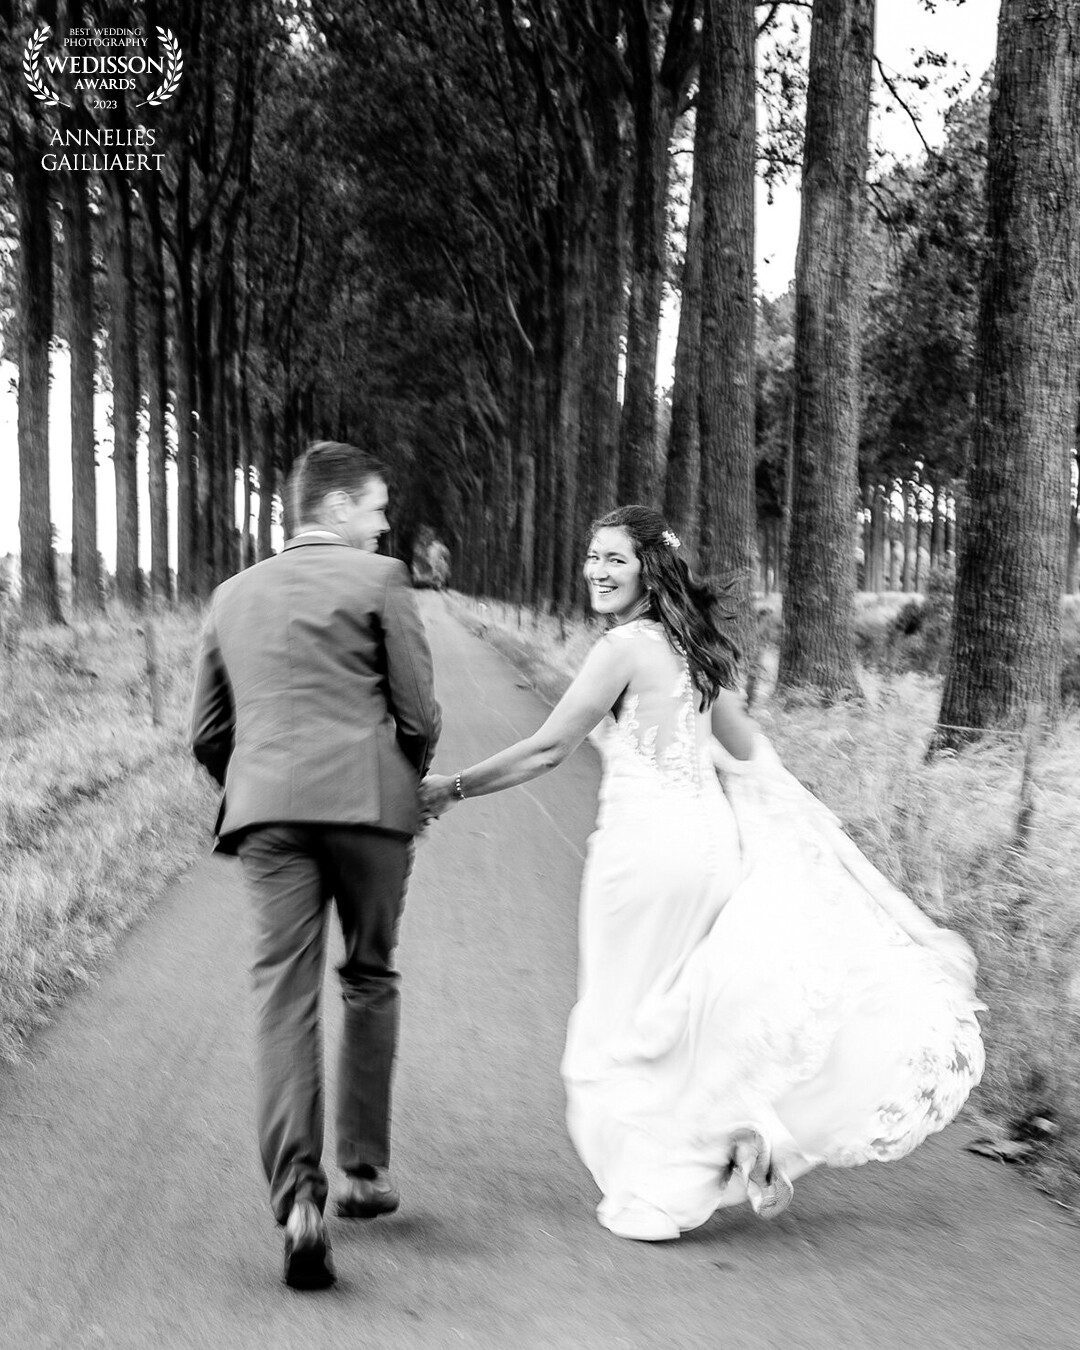 Run away, quite literally. Because it was raining when we did couple pictures, we decided to skip part of the reception when this picture was made